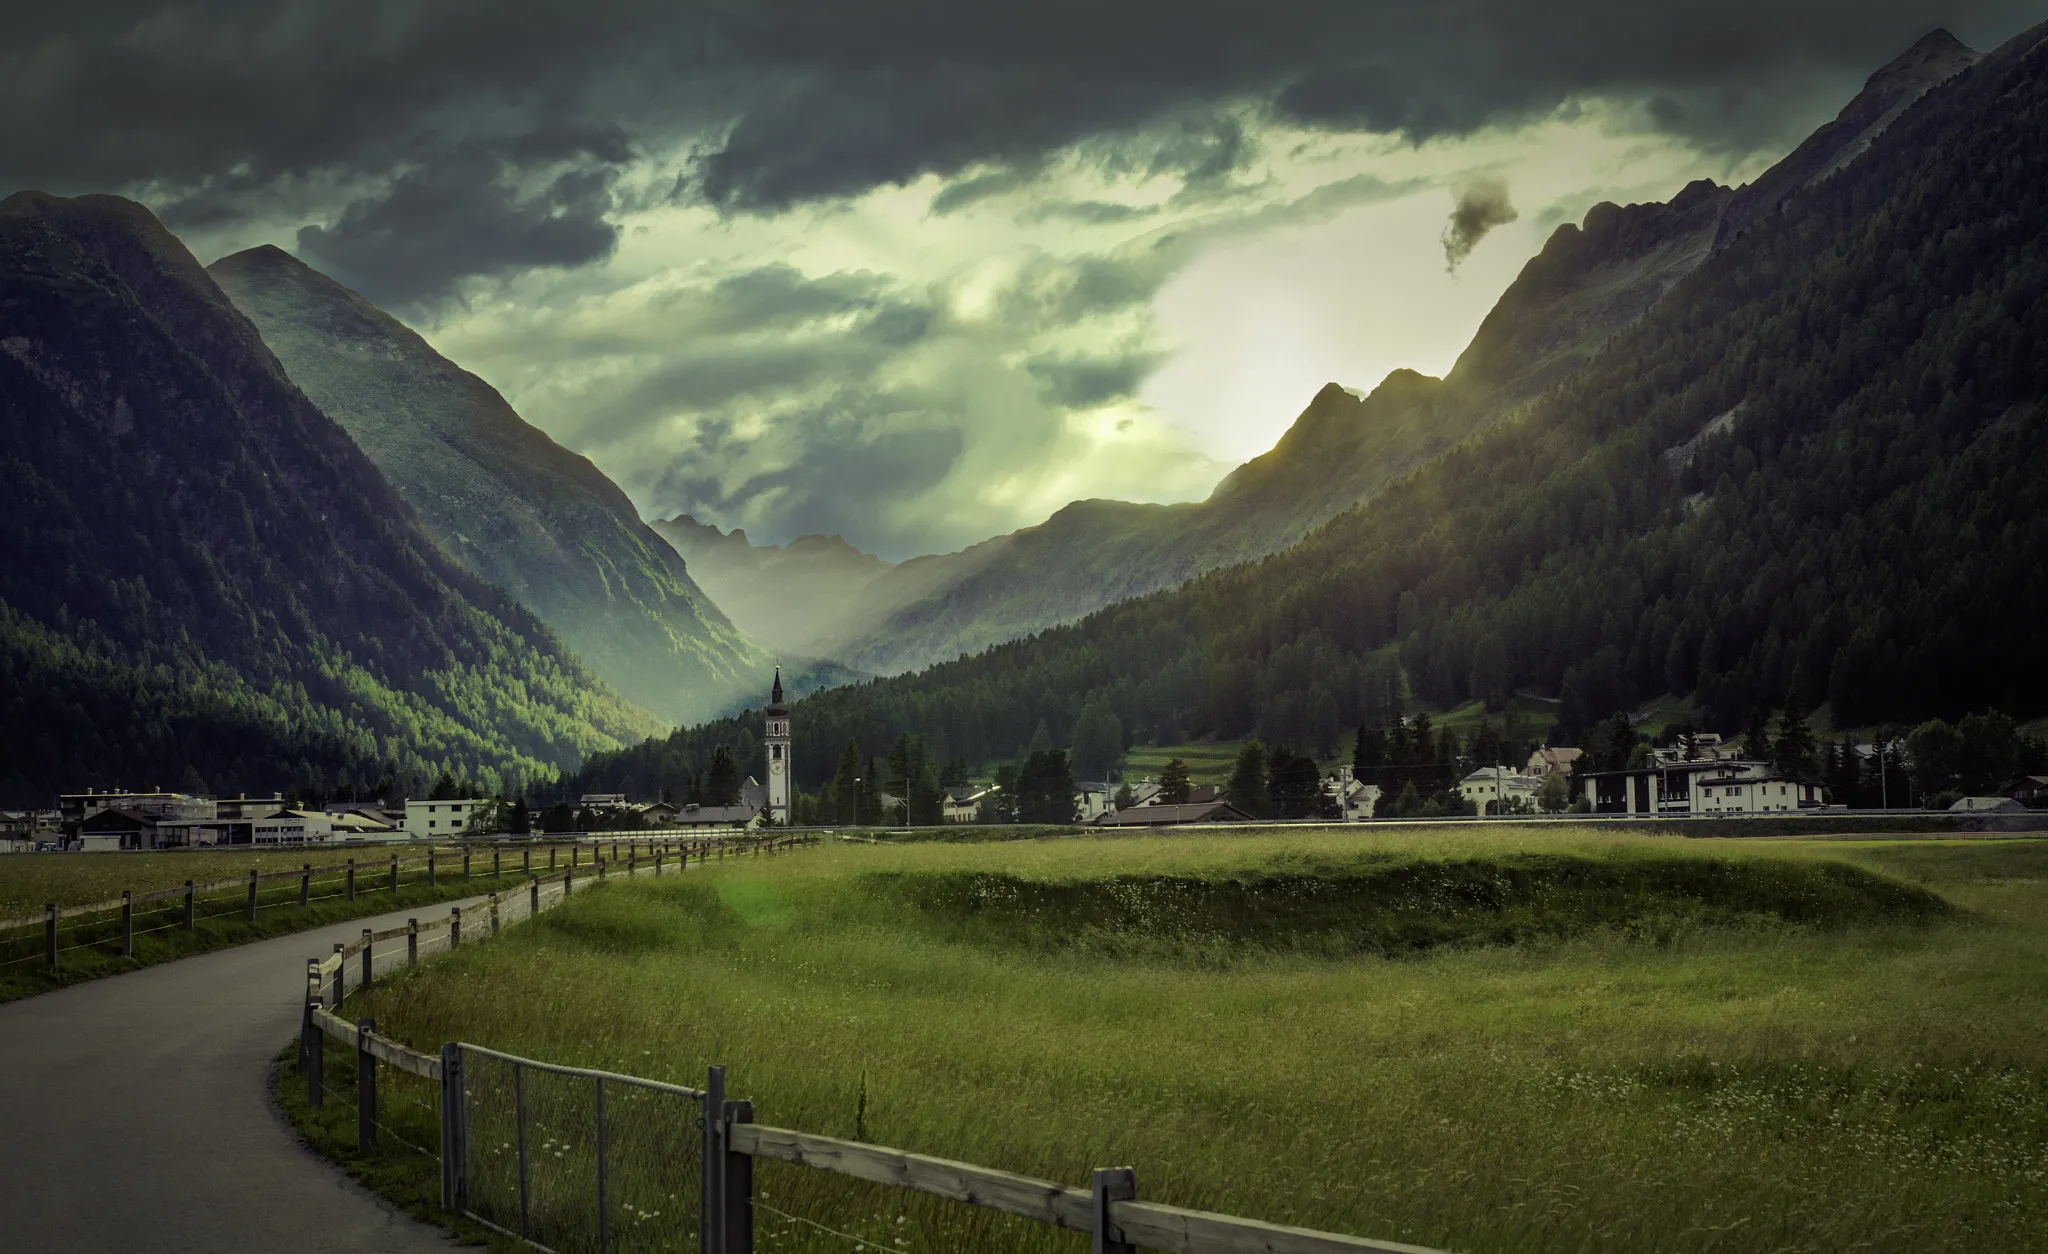 Photo showing: 500px provided description: Evening scenery in the Swiss Alps. [#switzerland ,#mountains ,#sun ,#light ,#clouds ,#road ,#warm ,#landscapes ,#village ,#scenery ,#bevers ,#upper engadine]